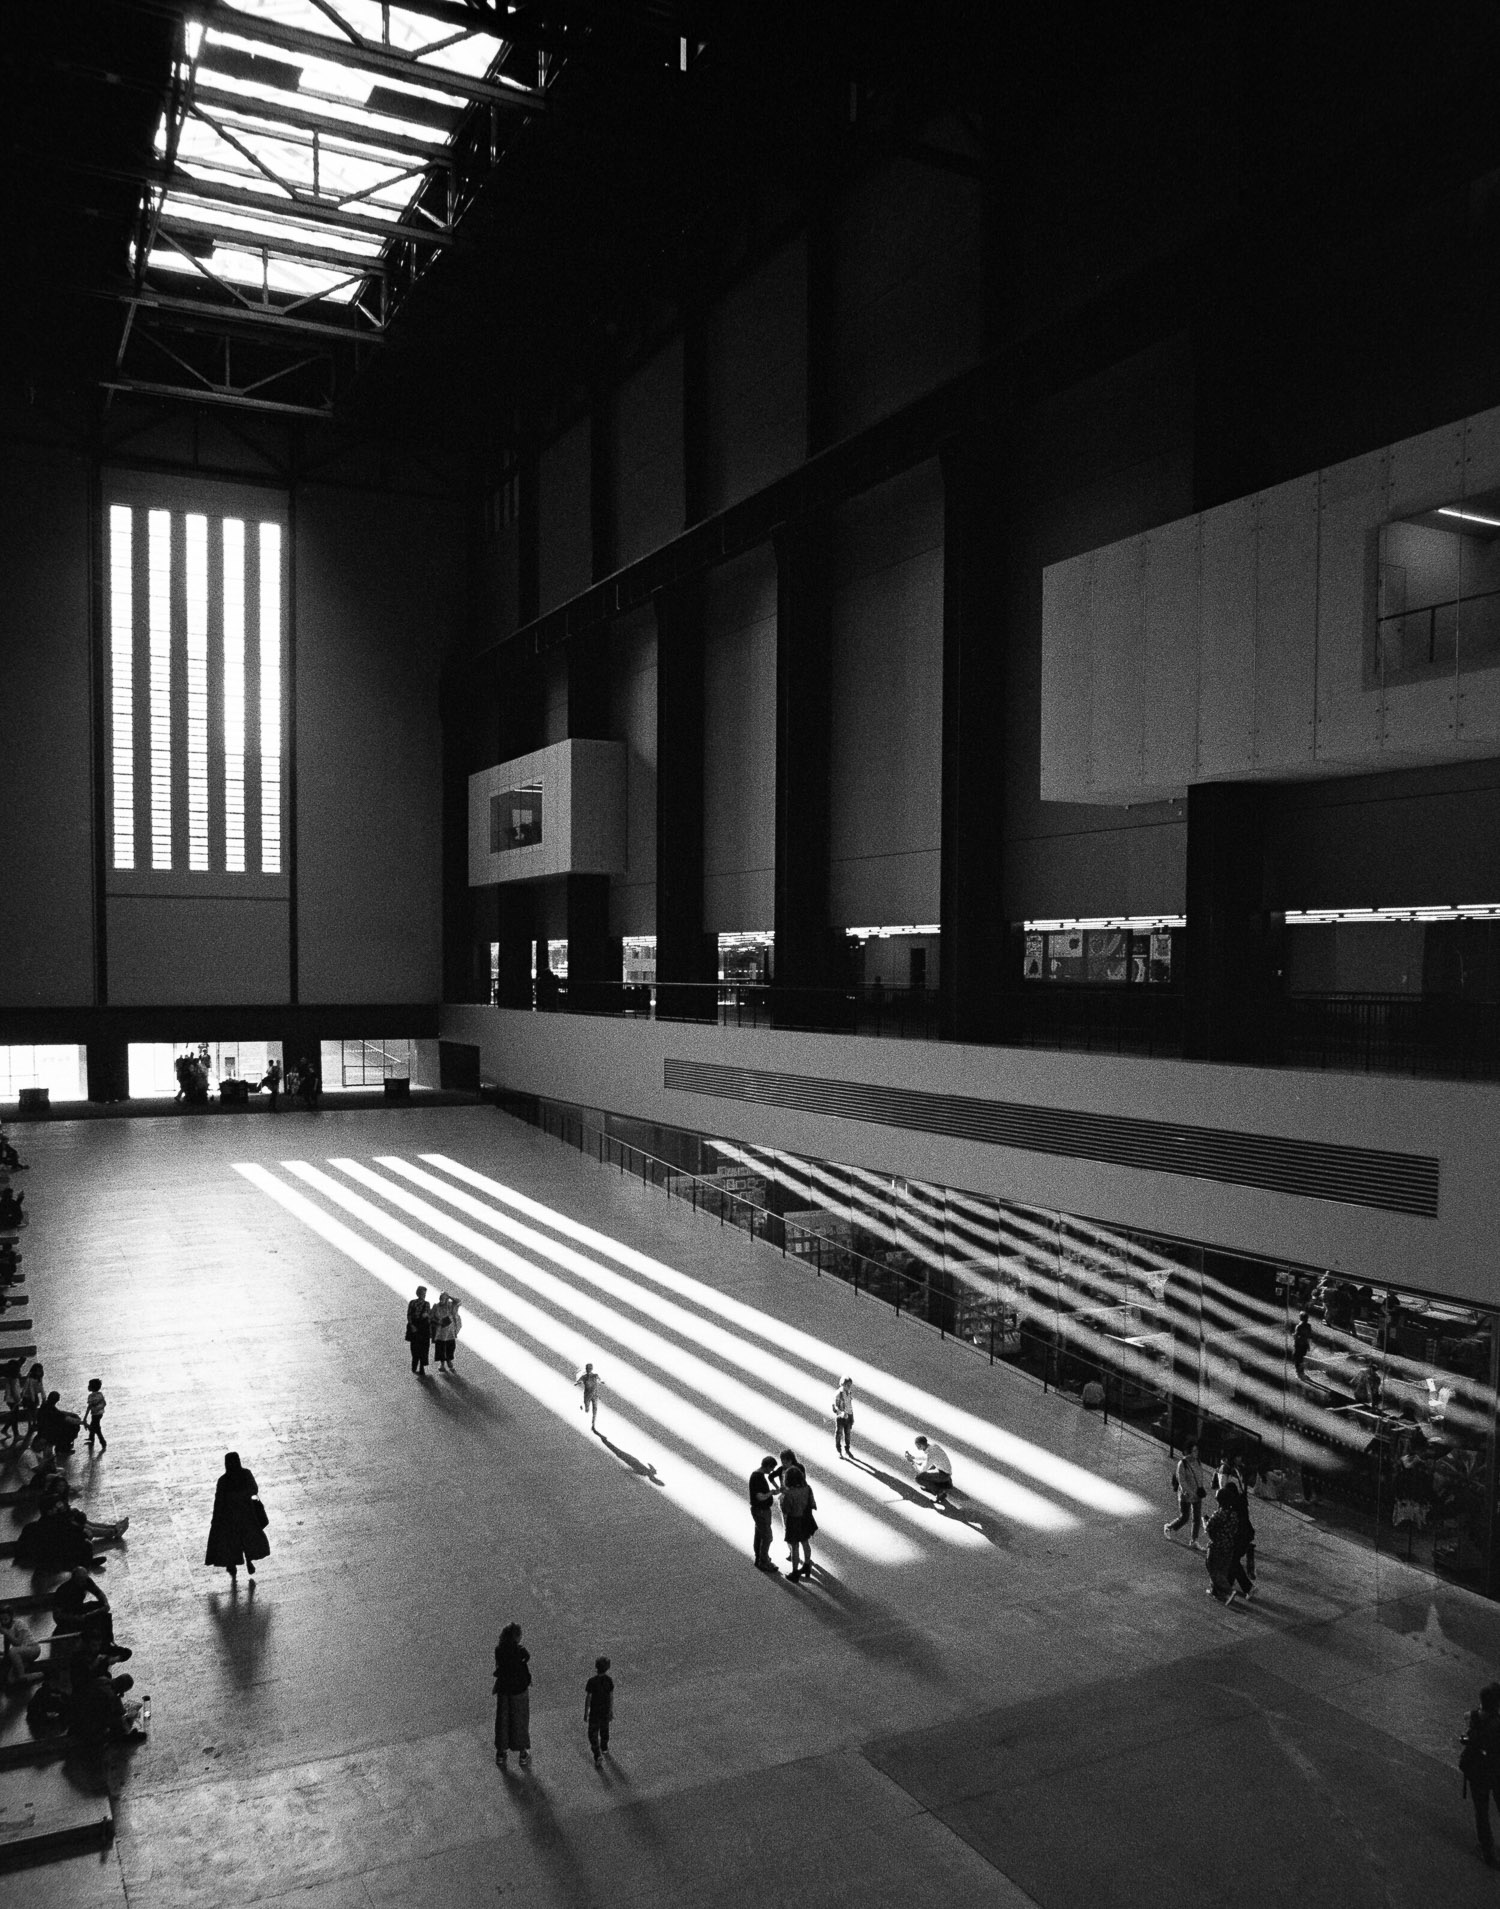 The Tate Museum in London